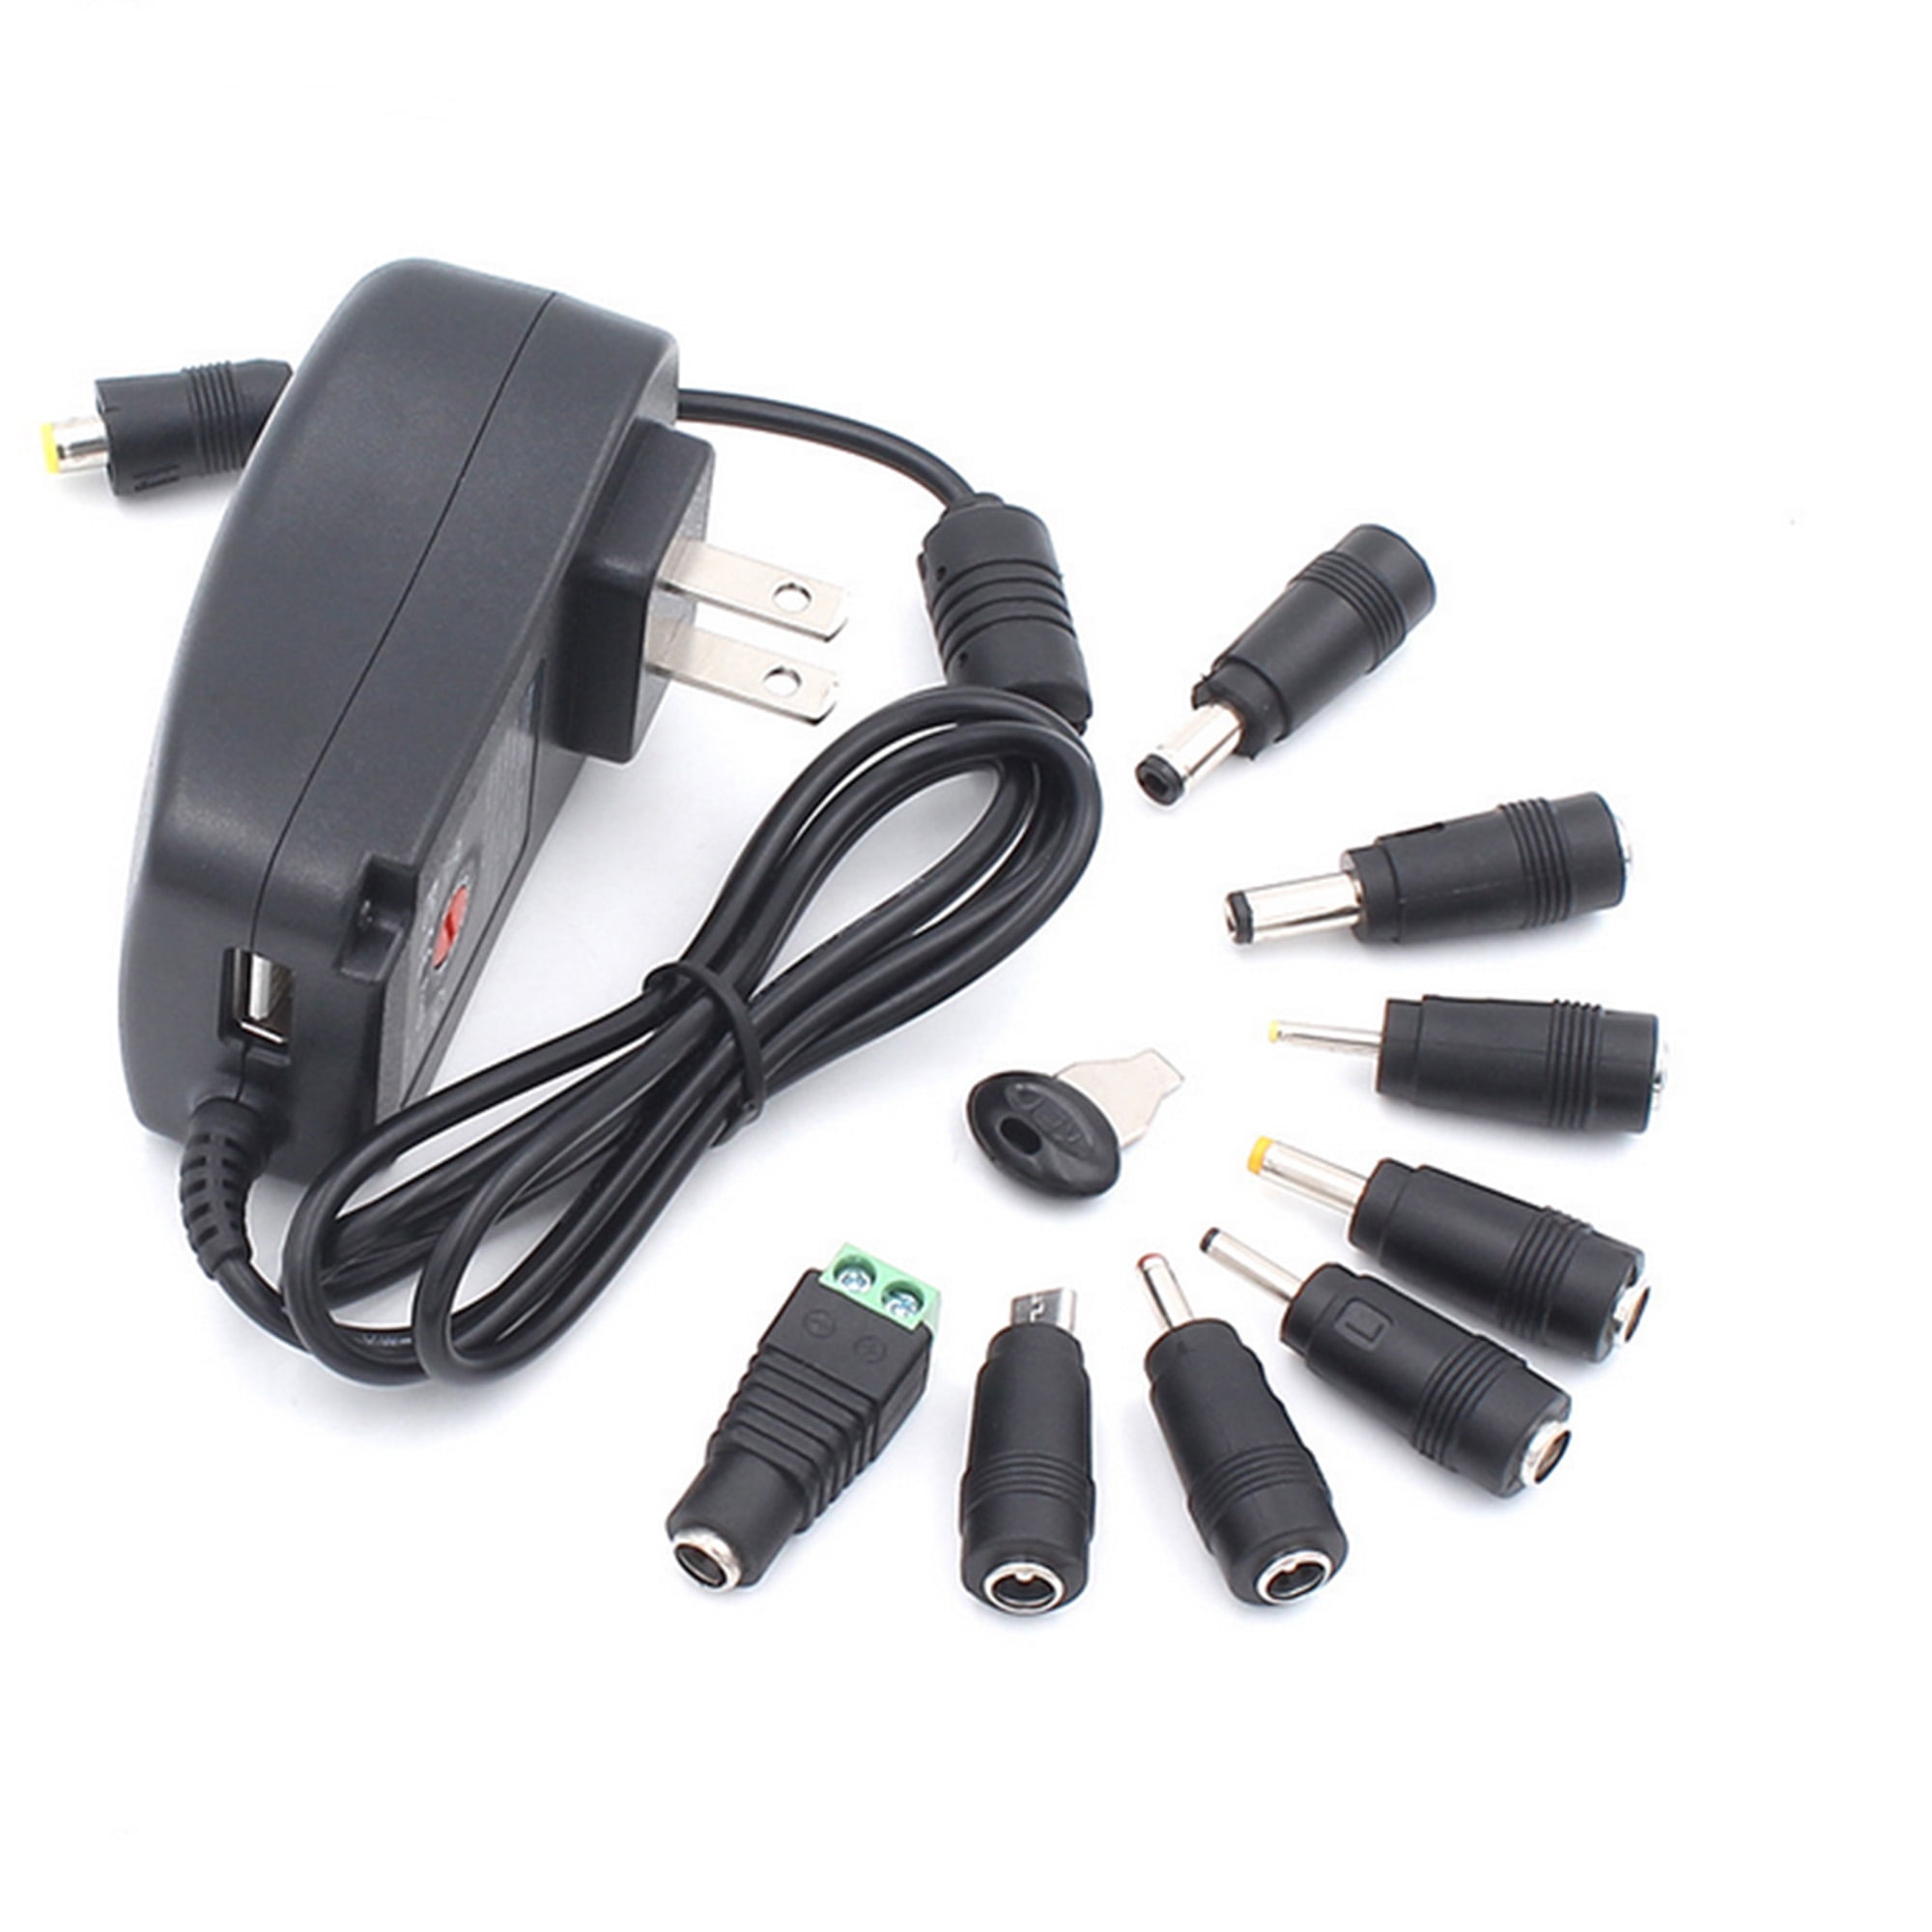 273-356 Plug Size 5.0x3.0 OMNIHIL 8 Feet AC/DC Adapter Compatible with ENERCELL 9VDC/1500MA Model UL Listed